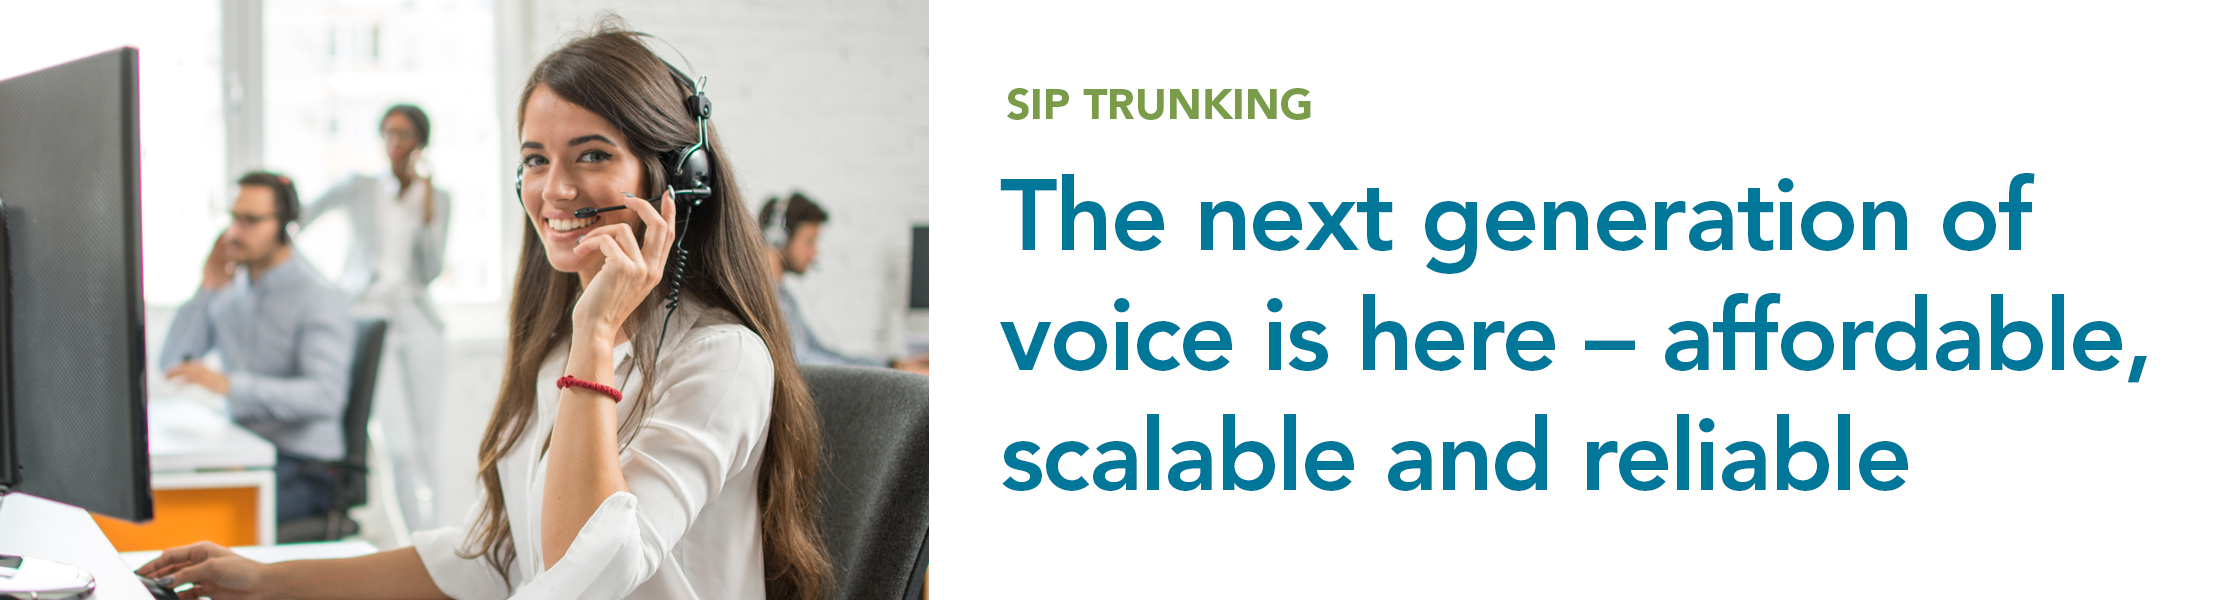 The next generation of voice is here - affordable scalable and reliable